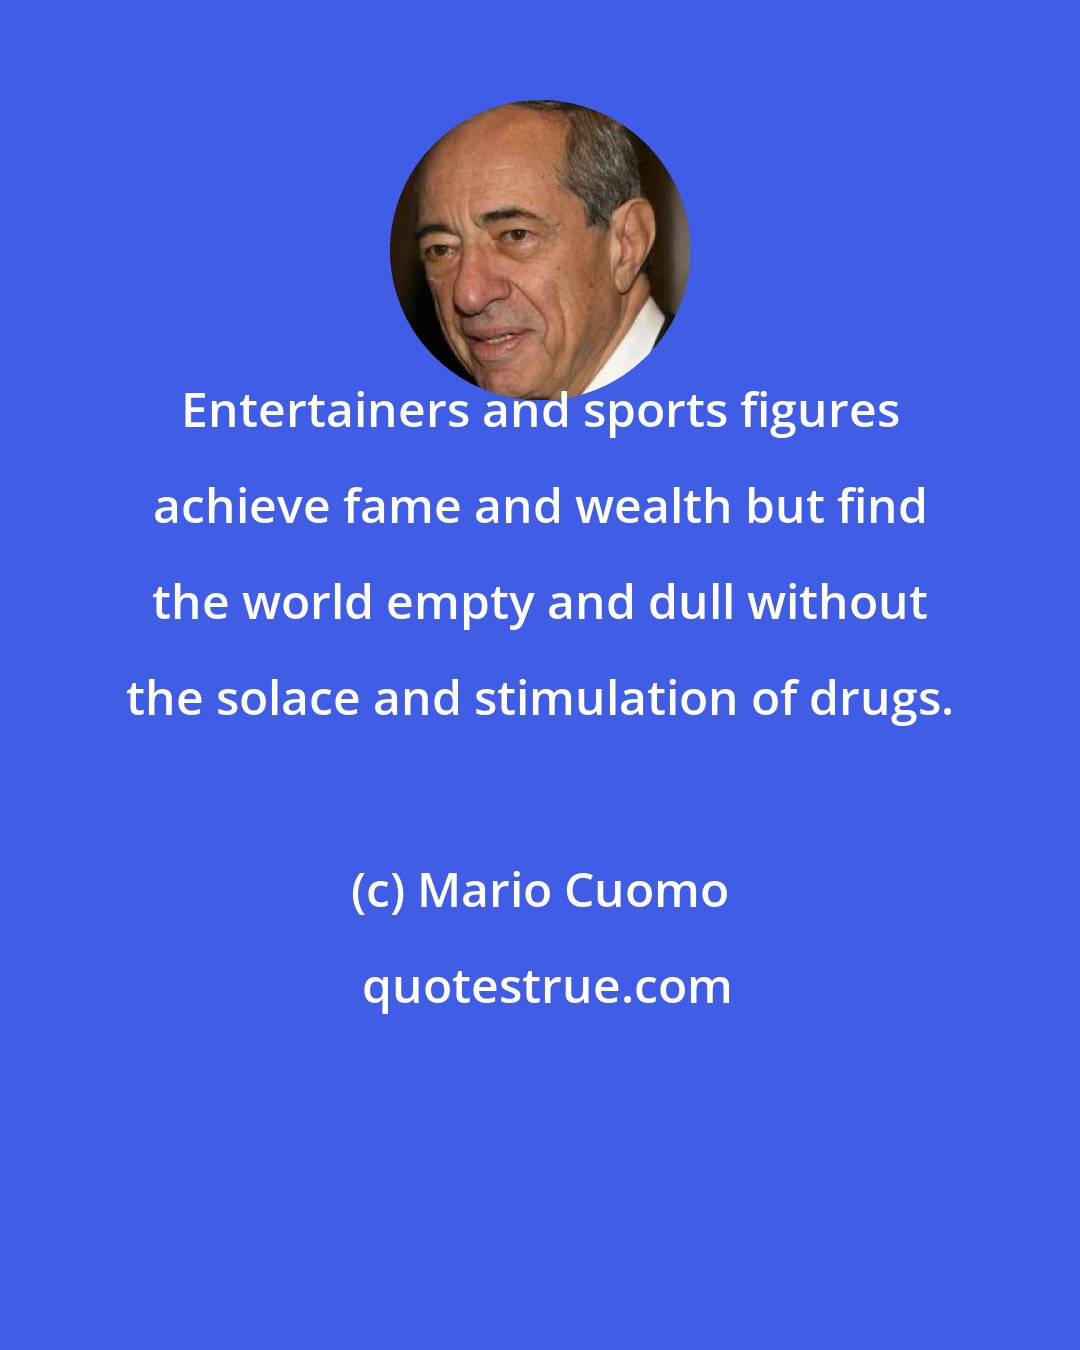 Mario Cuomo: Entertainers and sports figures achieve fame and wealth but find the world empty and dull without the solace and stimulation of drugs.